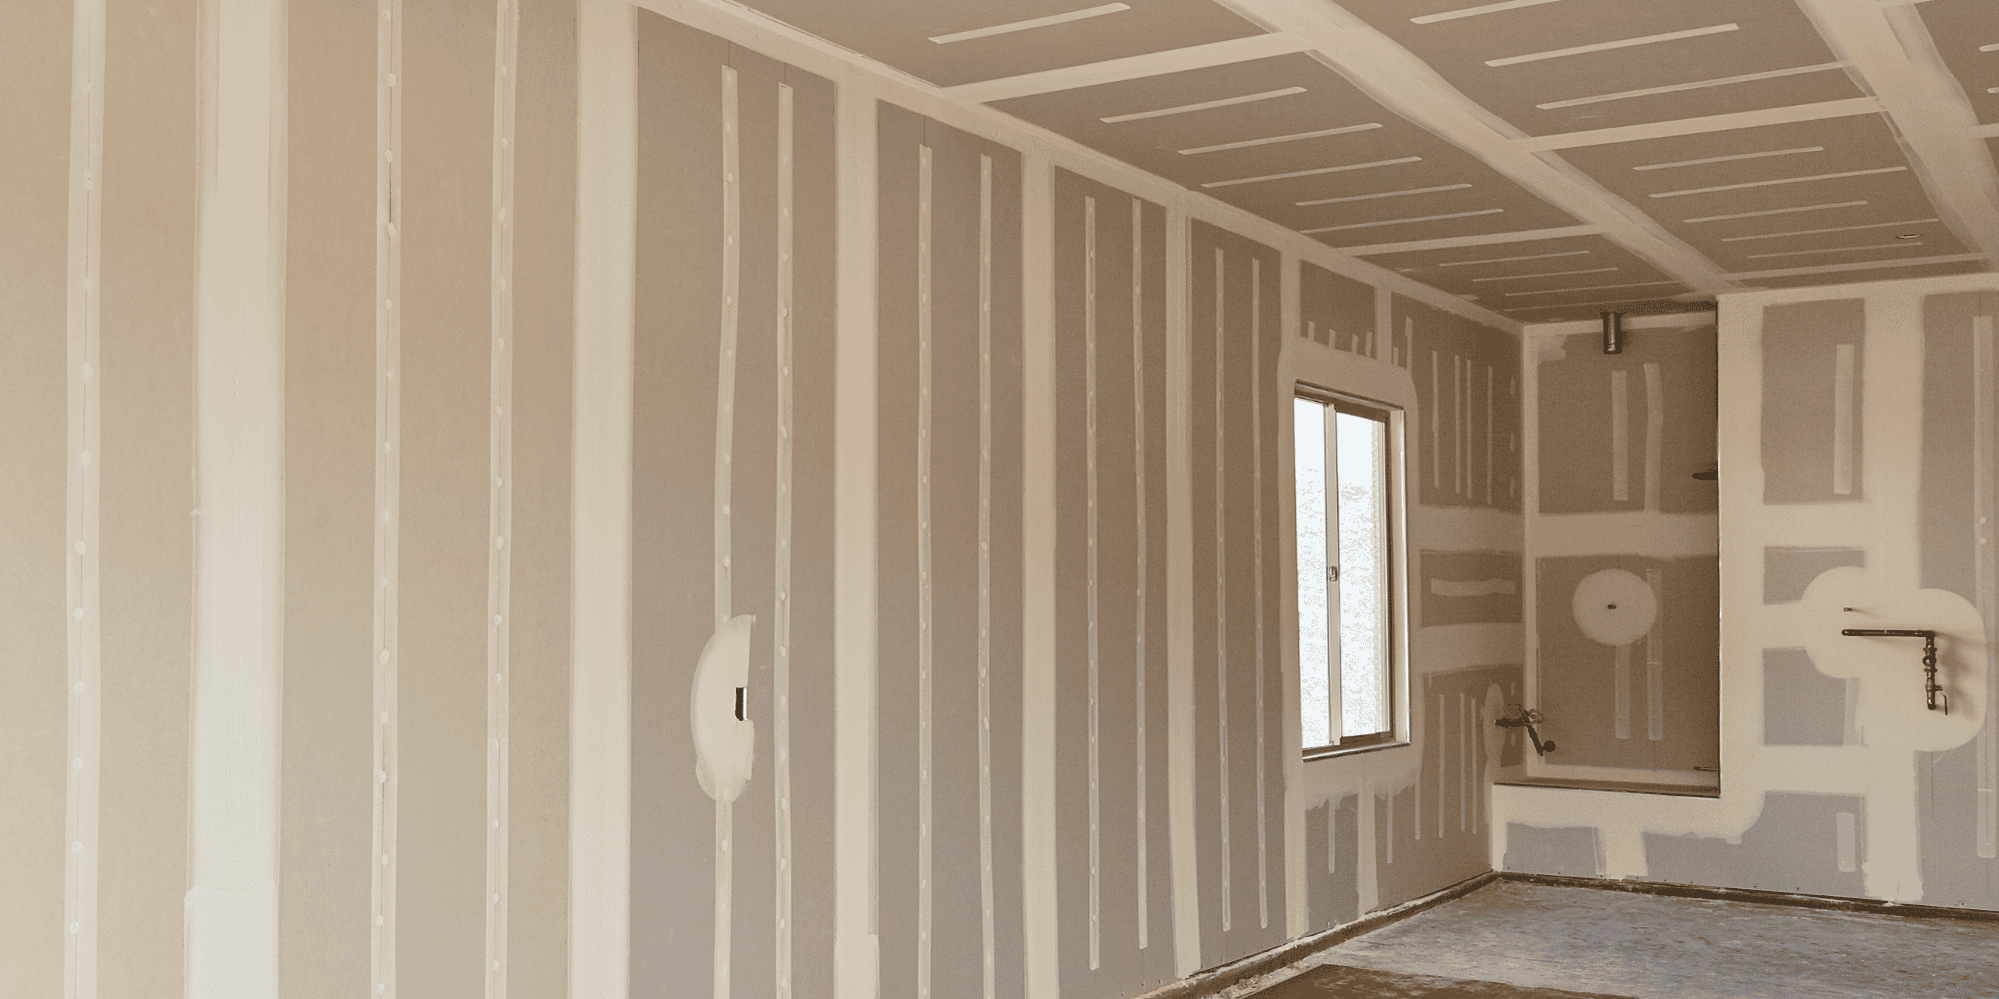 Drywall performed by Lake Norman Drywall